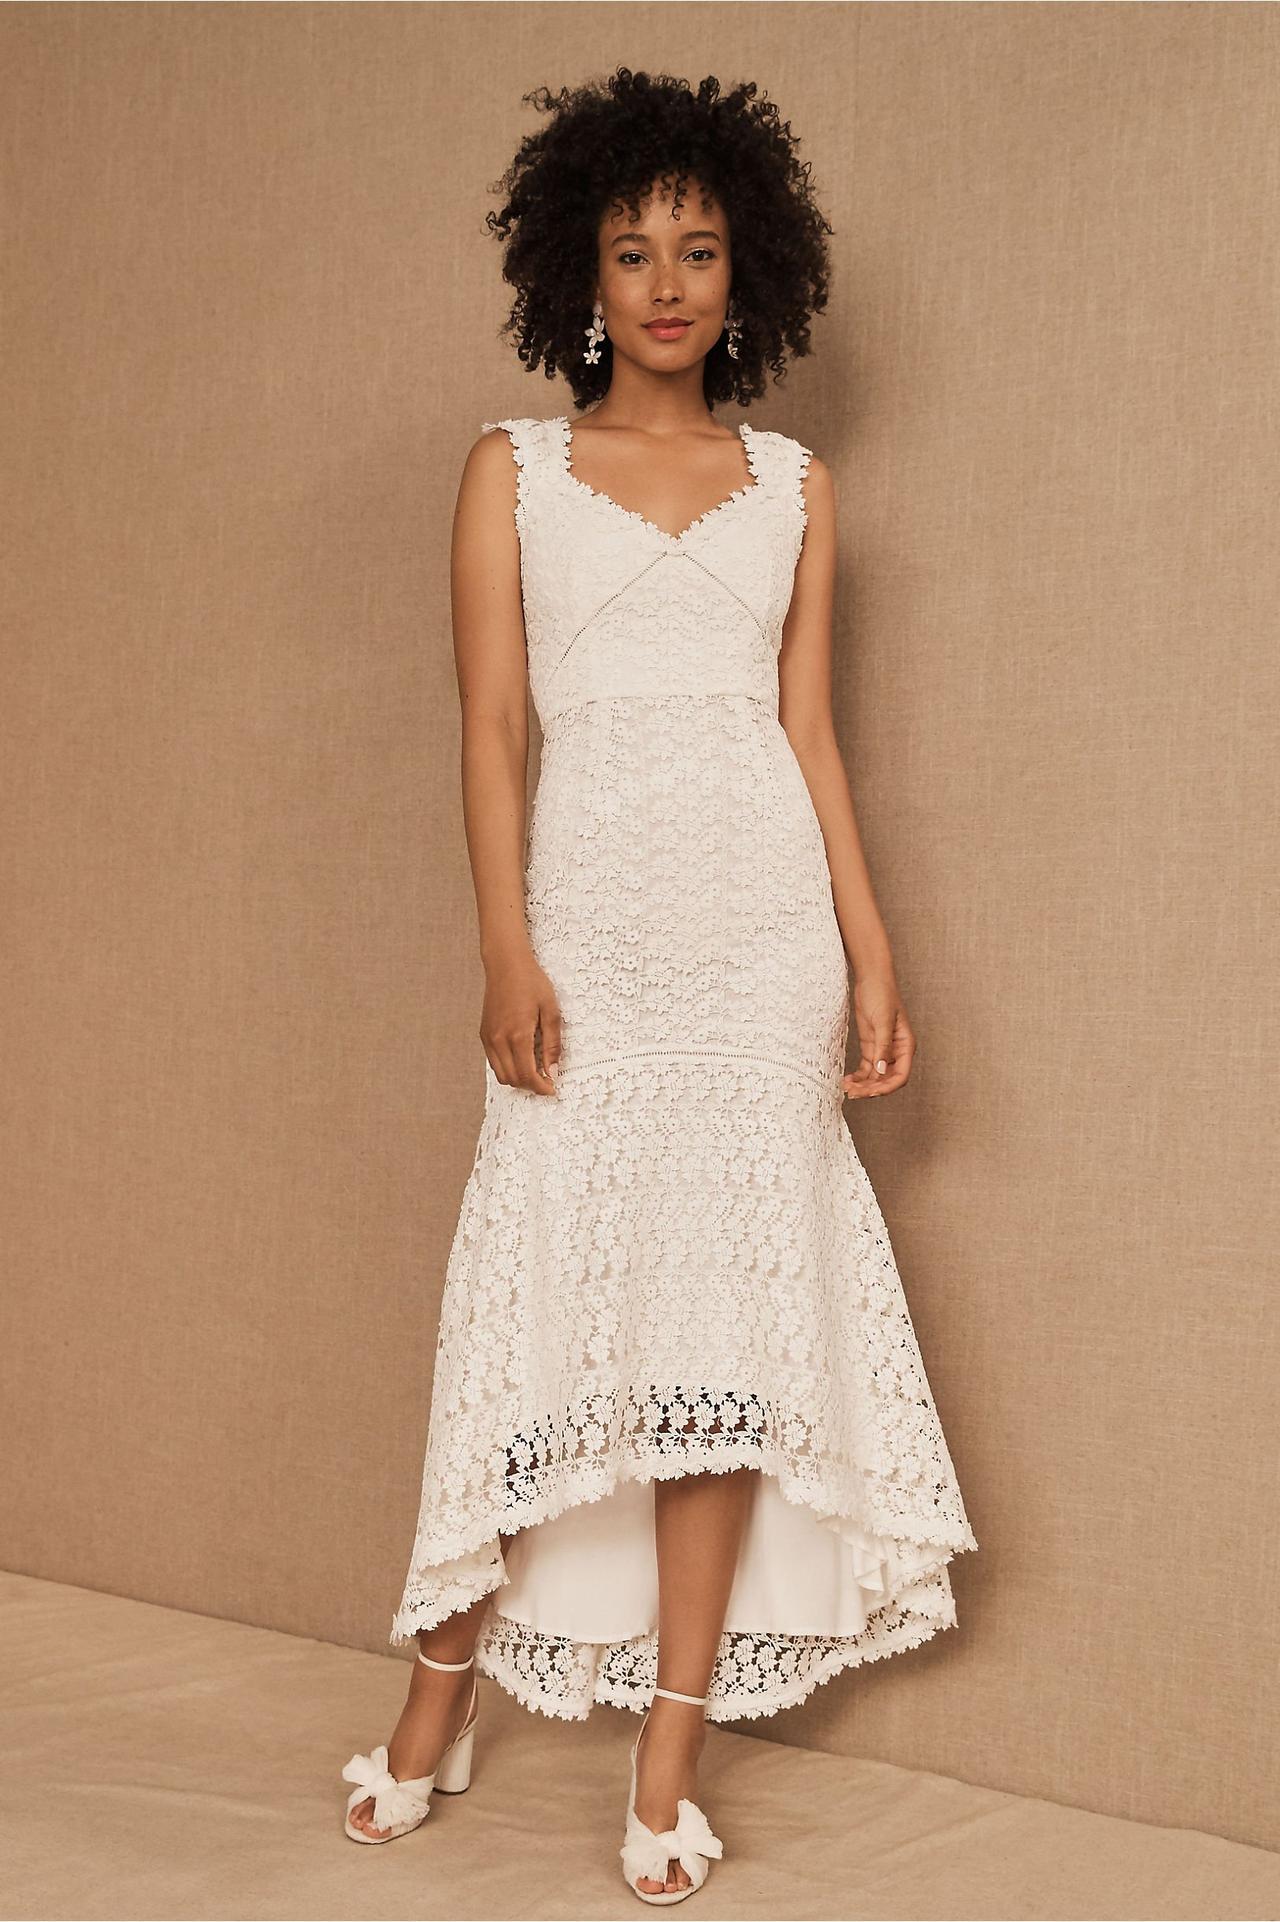 31 Rehearsal Dinner Dresses And Outfits For Trendsetting Brides